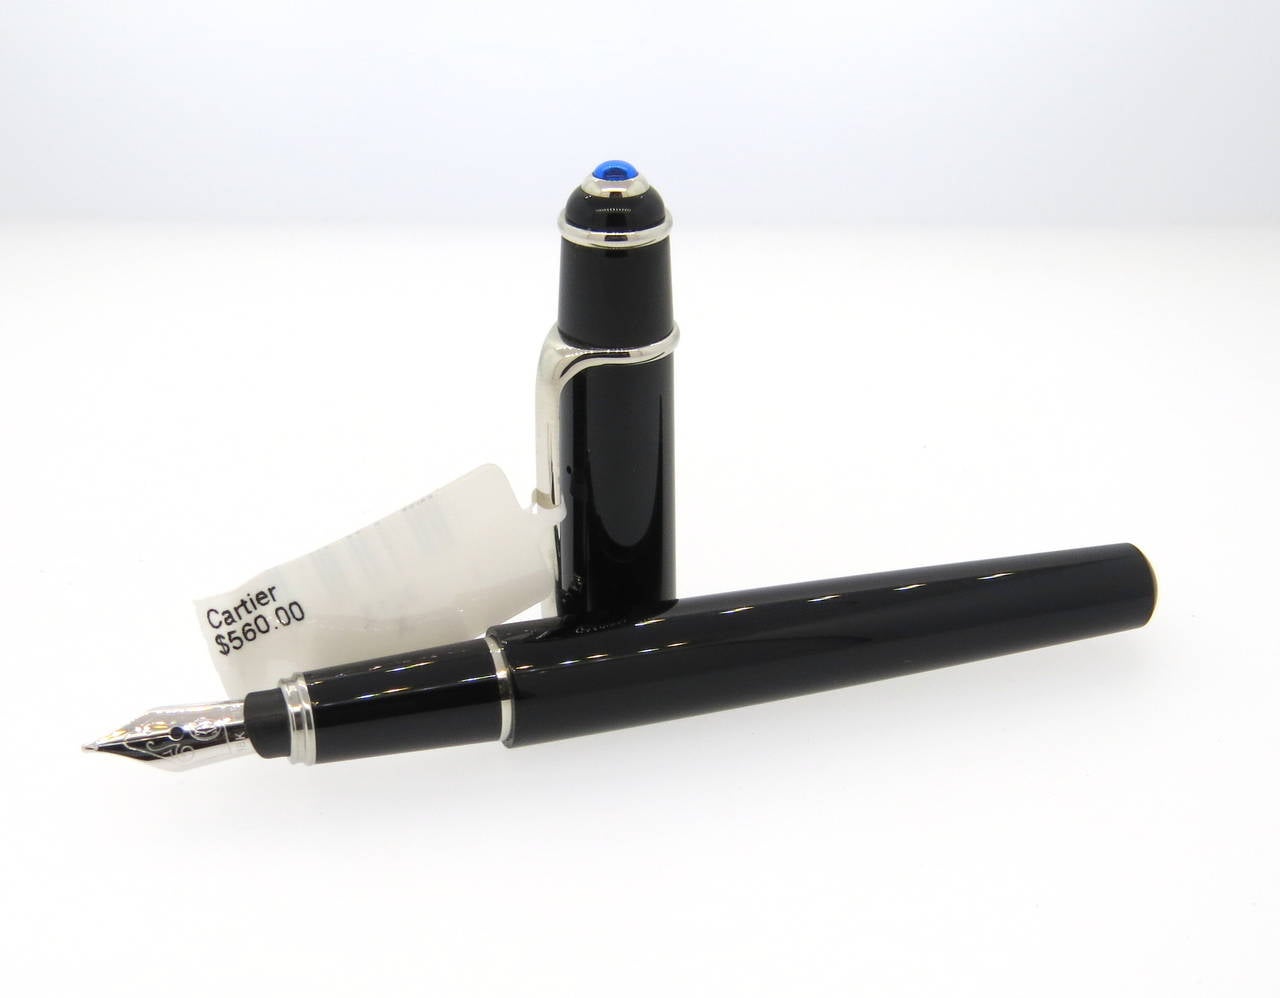 Durable Cartier Mini Diabolo fountain pen featuring a smooth black composite exterior with platinum finishes and an 18K gold nib. Pen measures 118mm and is accented by a jeweler's sapphire on the pen cap. Pen is a brand new in store sample. Comes